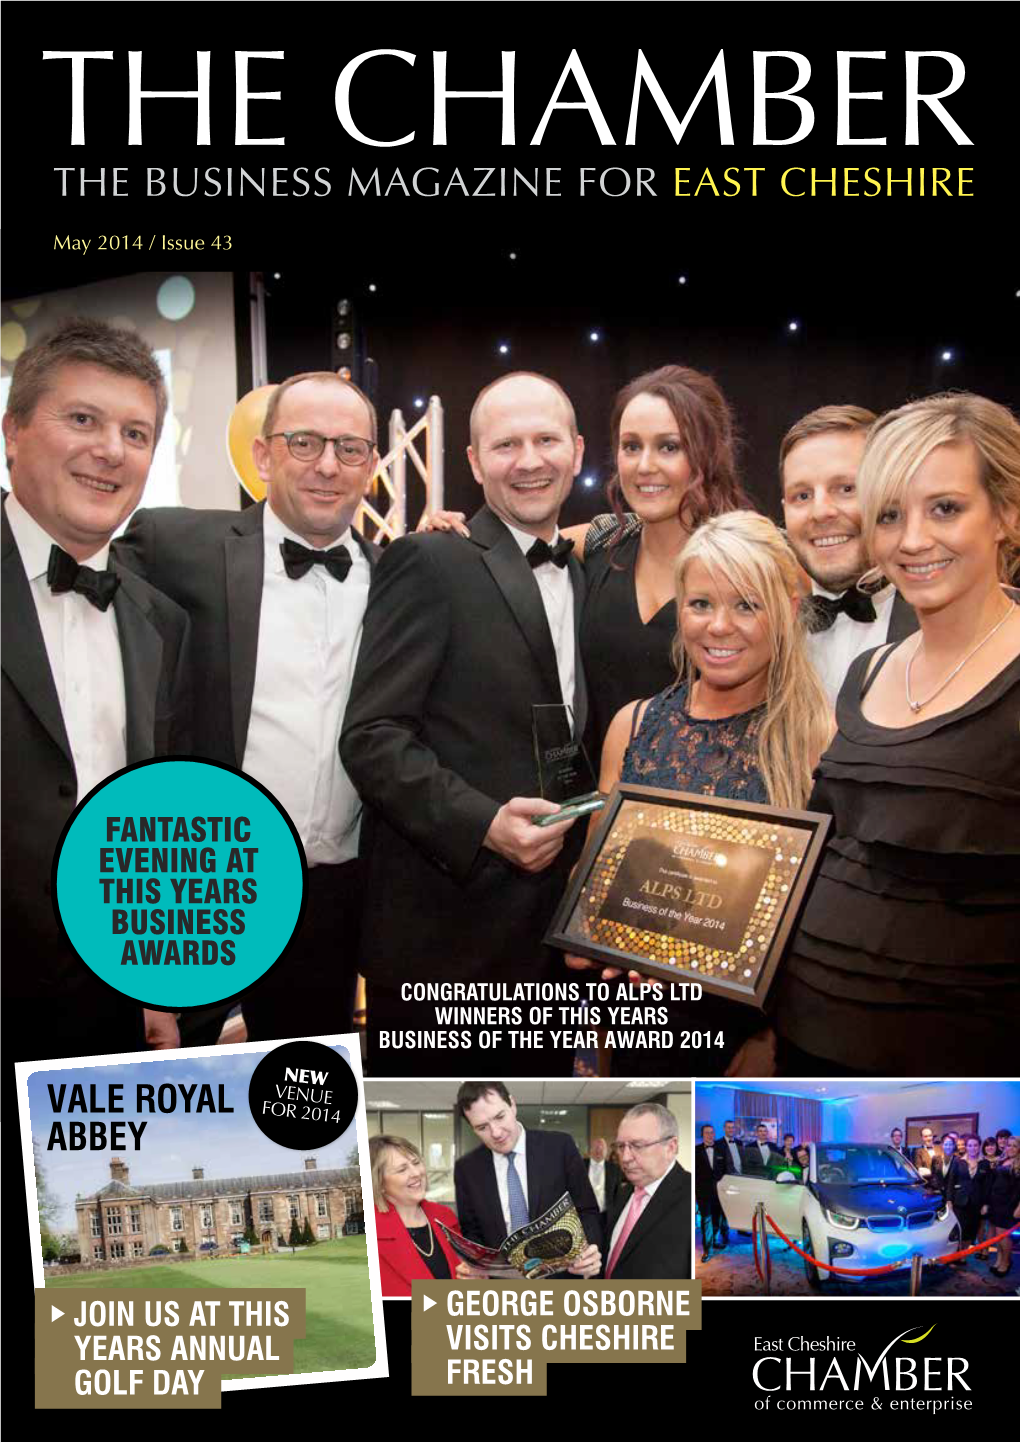 The Business Magazine for East Cheshire